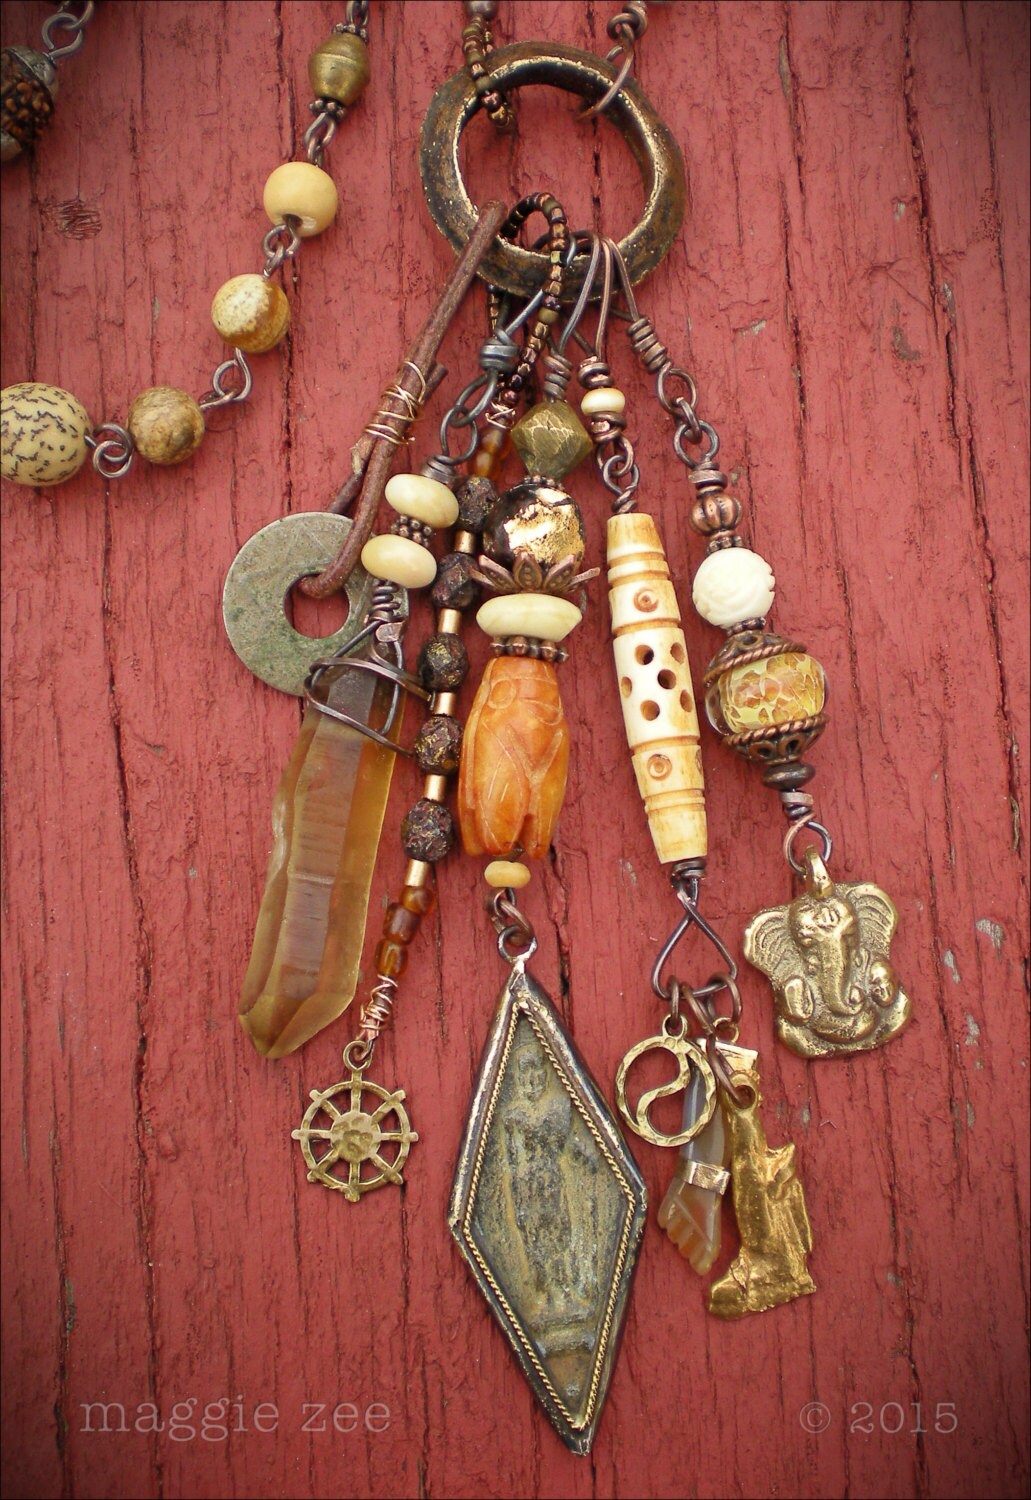 The Shaman's Song Amulet Necklace